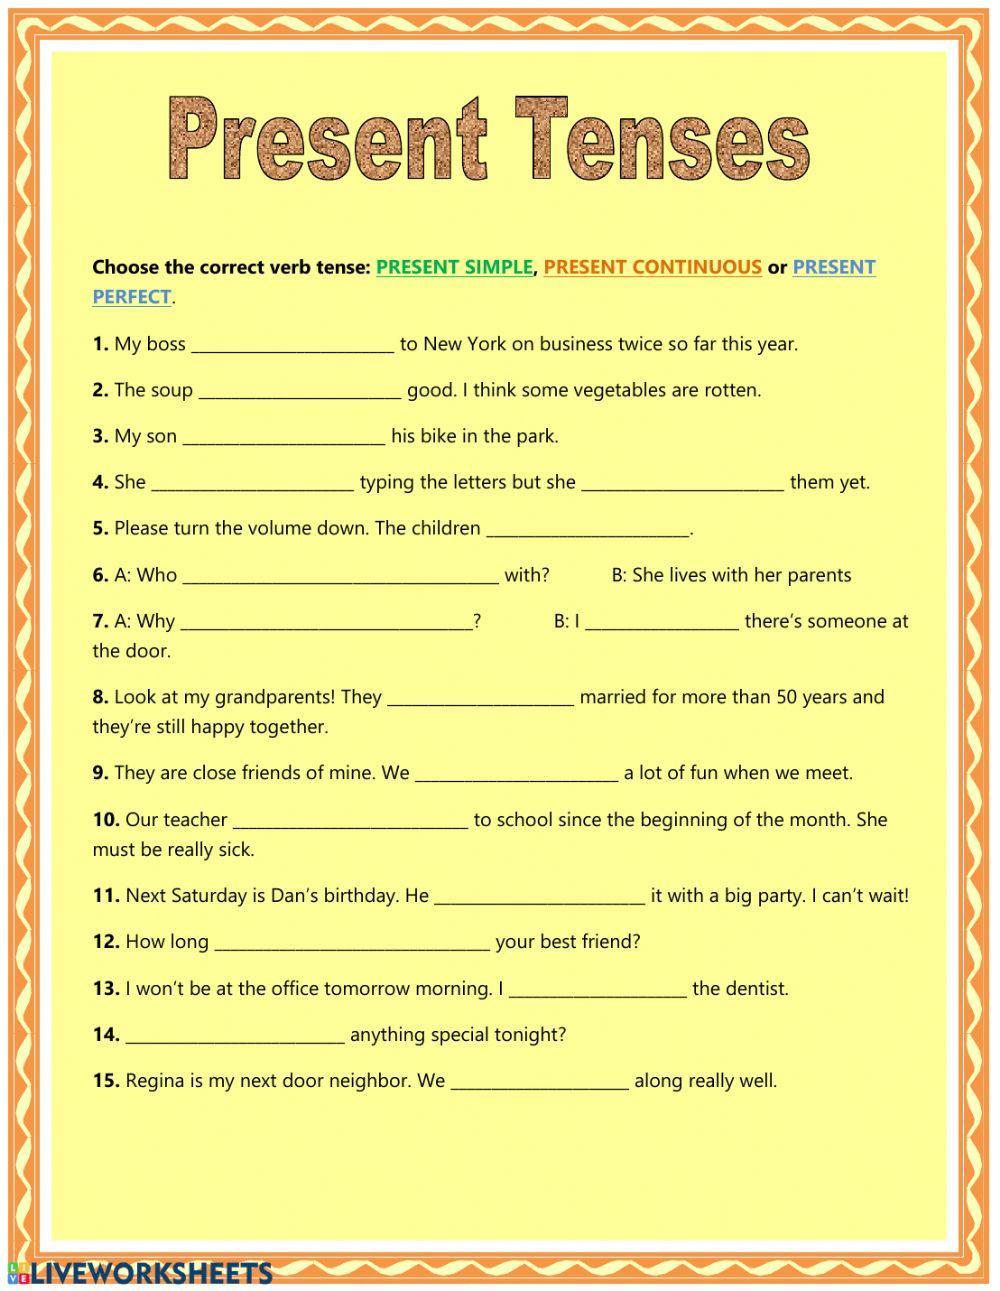 Choose the correct present tense. Present perfect simple for Tenses. Mixed Tenses exercises Intermediate упражнения. Past perfect and past simple Tenses exercise. Present perfect simple Tense exercise.